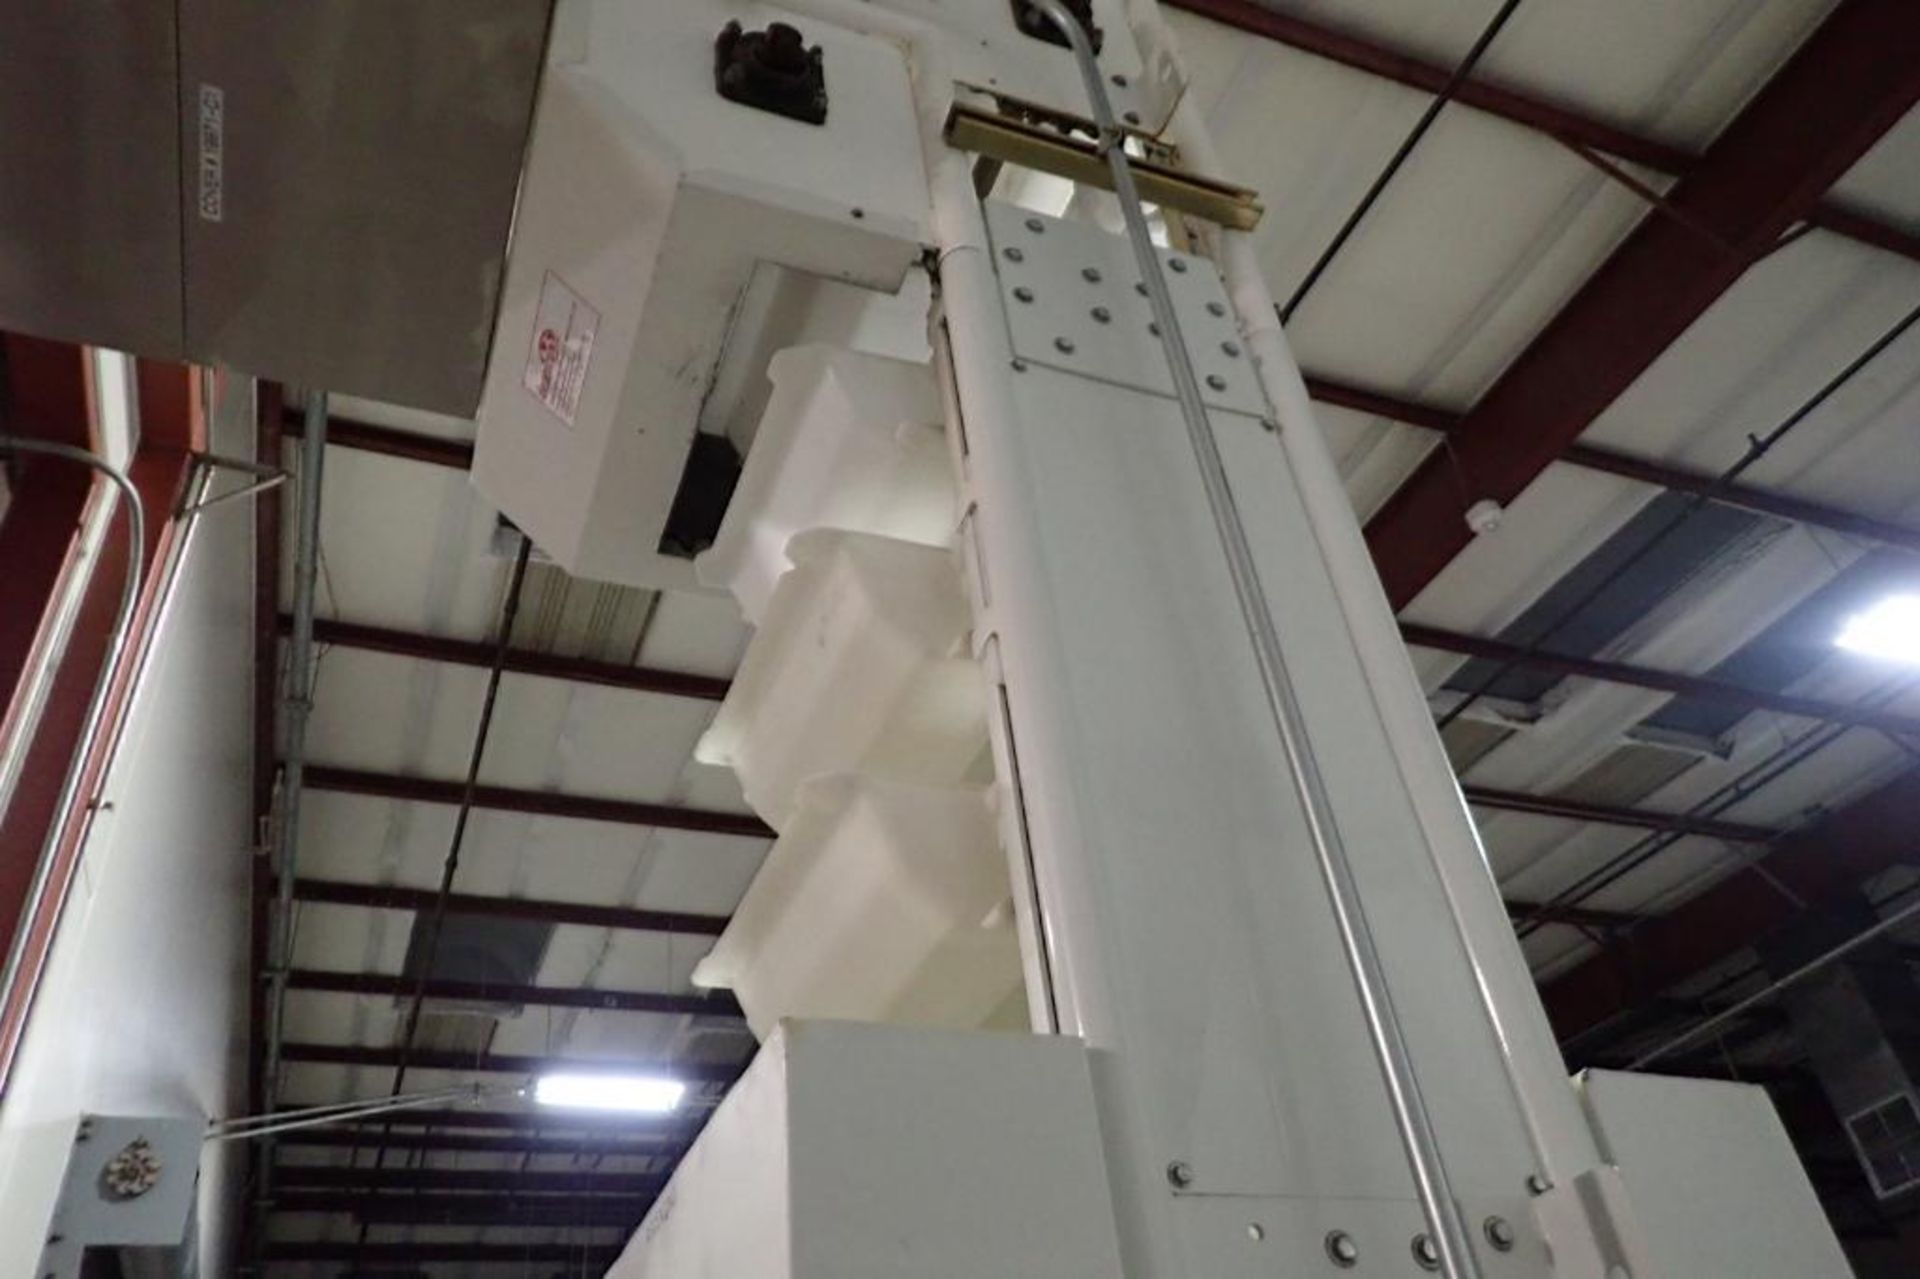 Deamco Z-shapped over-lapping bucket elevator. {Located in Visalia, CA} - Image 15 of 20